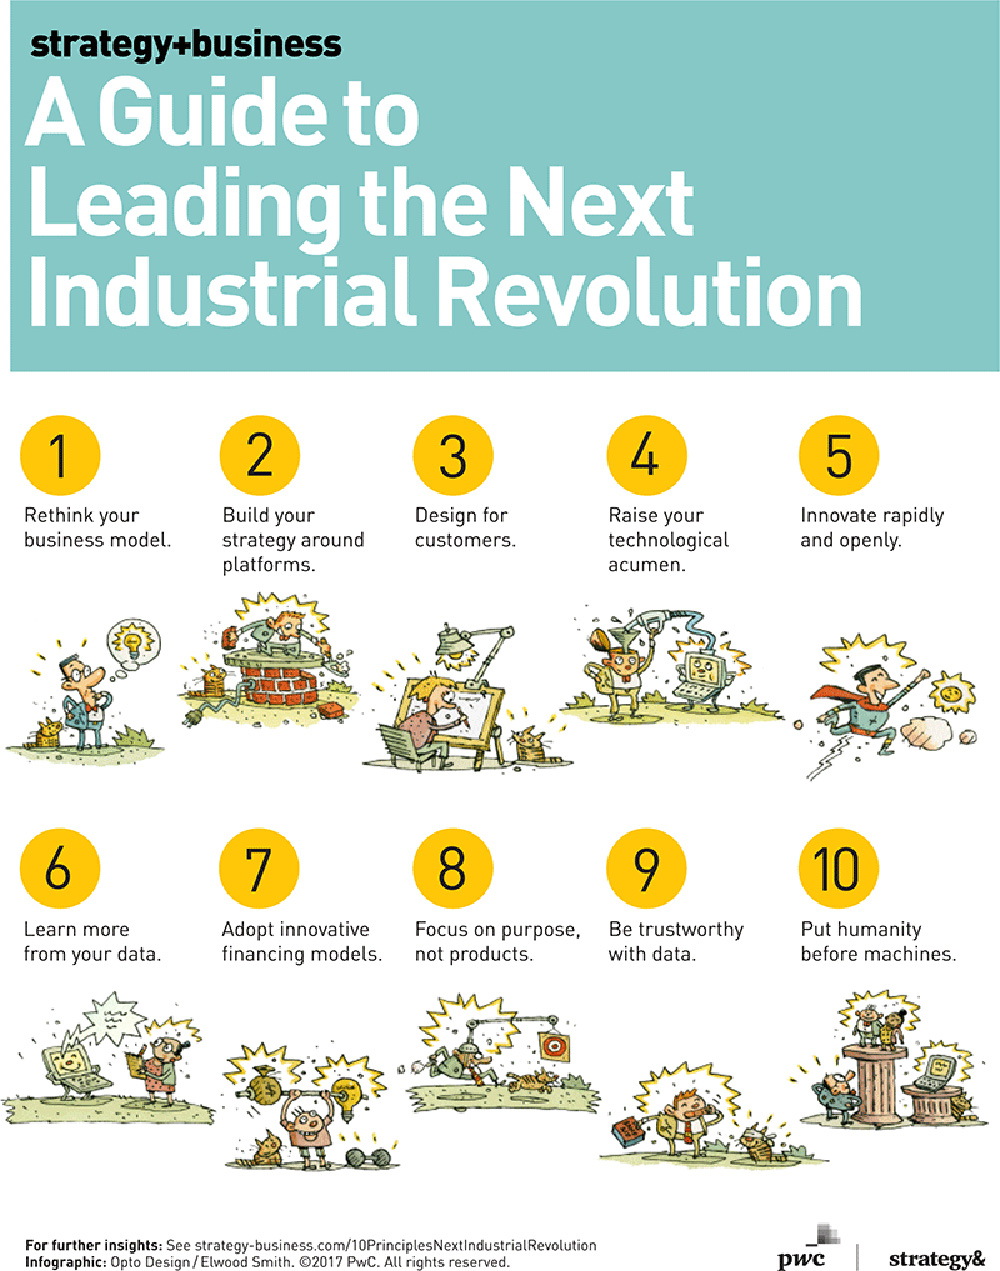 A Guide to the Industrial Revolution